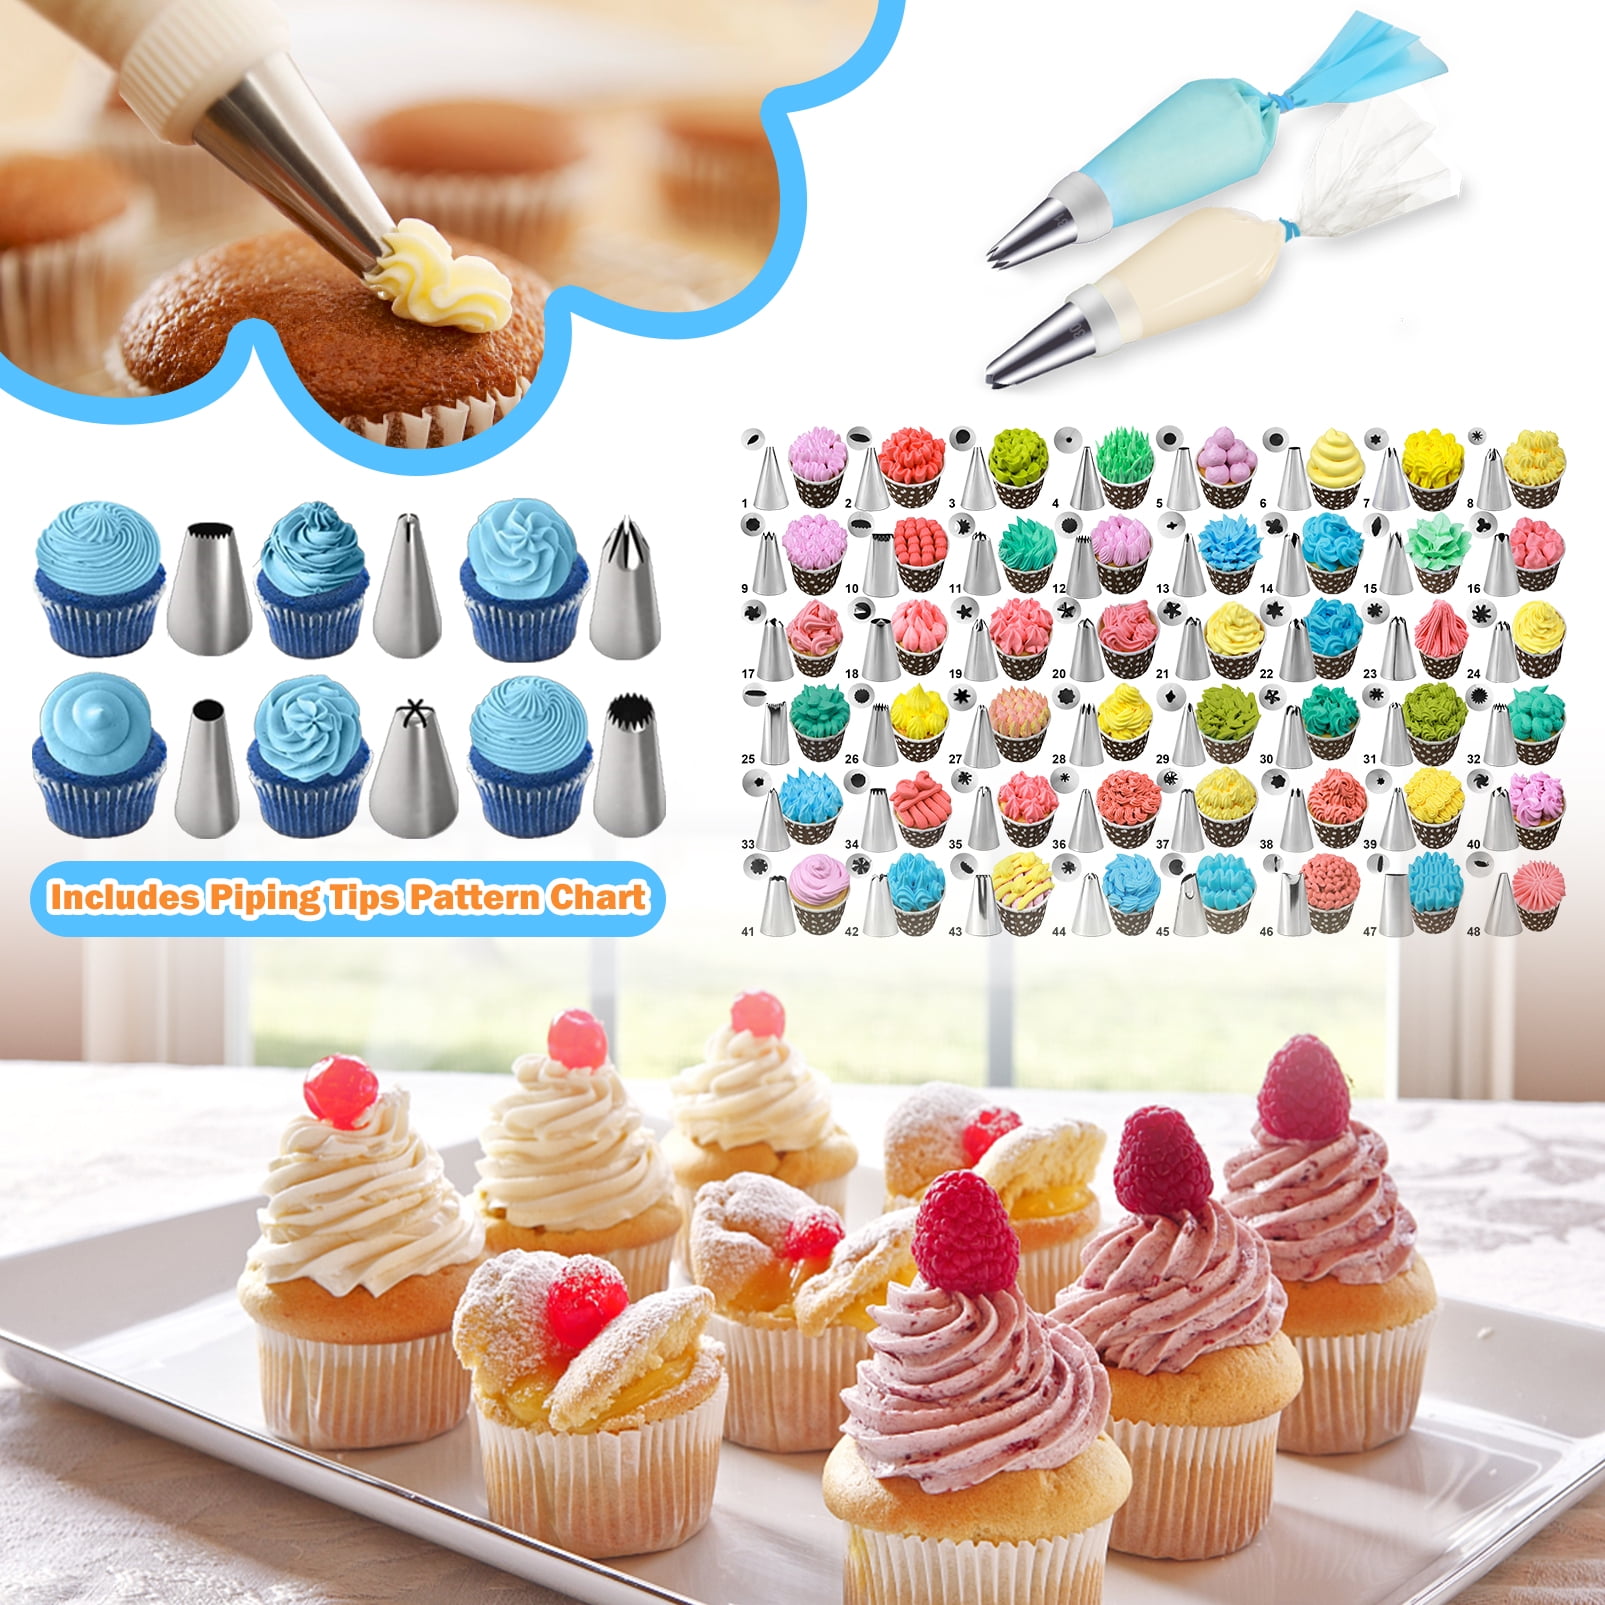 73 Pcs Cake Decorating Supplies Kit With Cake Turntable Stand Icing Tip Set  For Cupcakes Biscuits Donuts